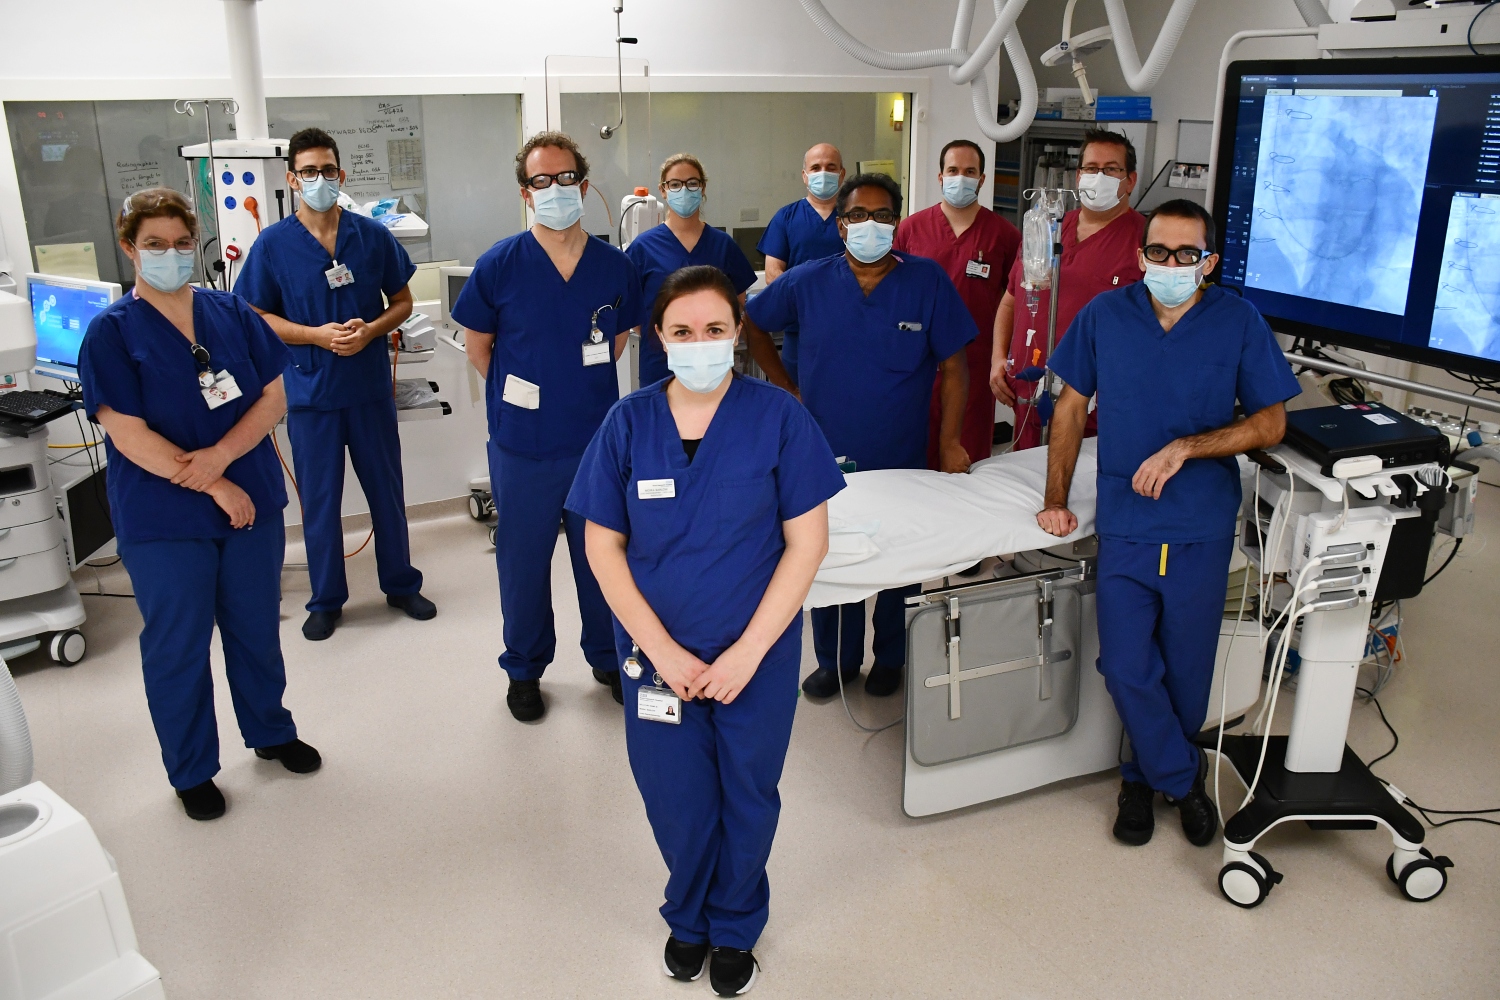 A group of people wearing blue and red scrubs, standing. 